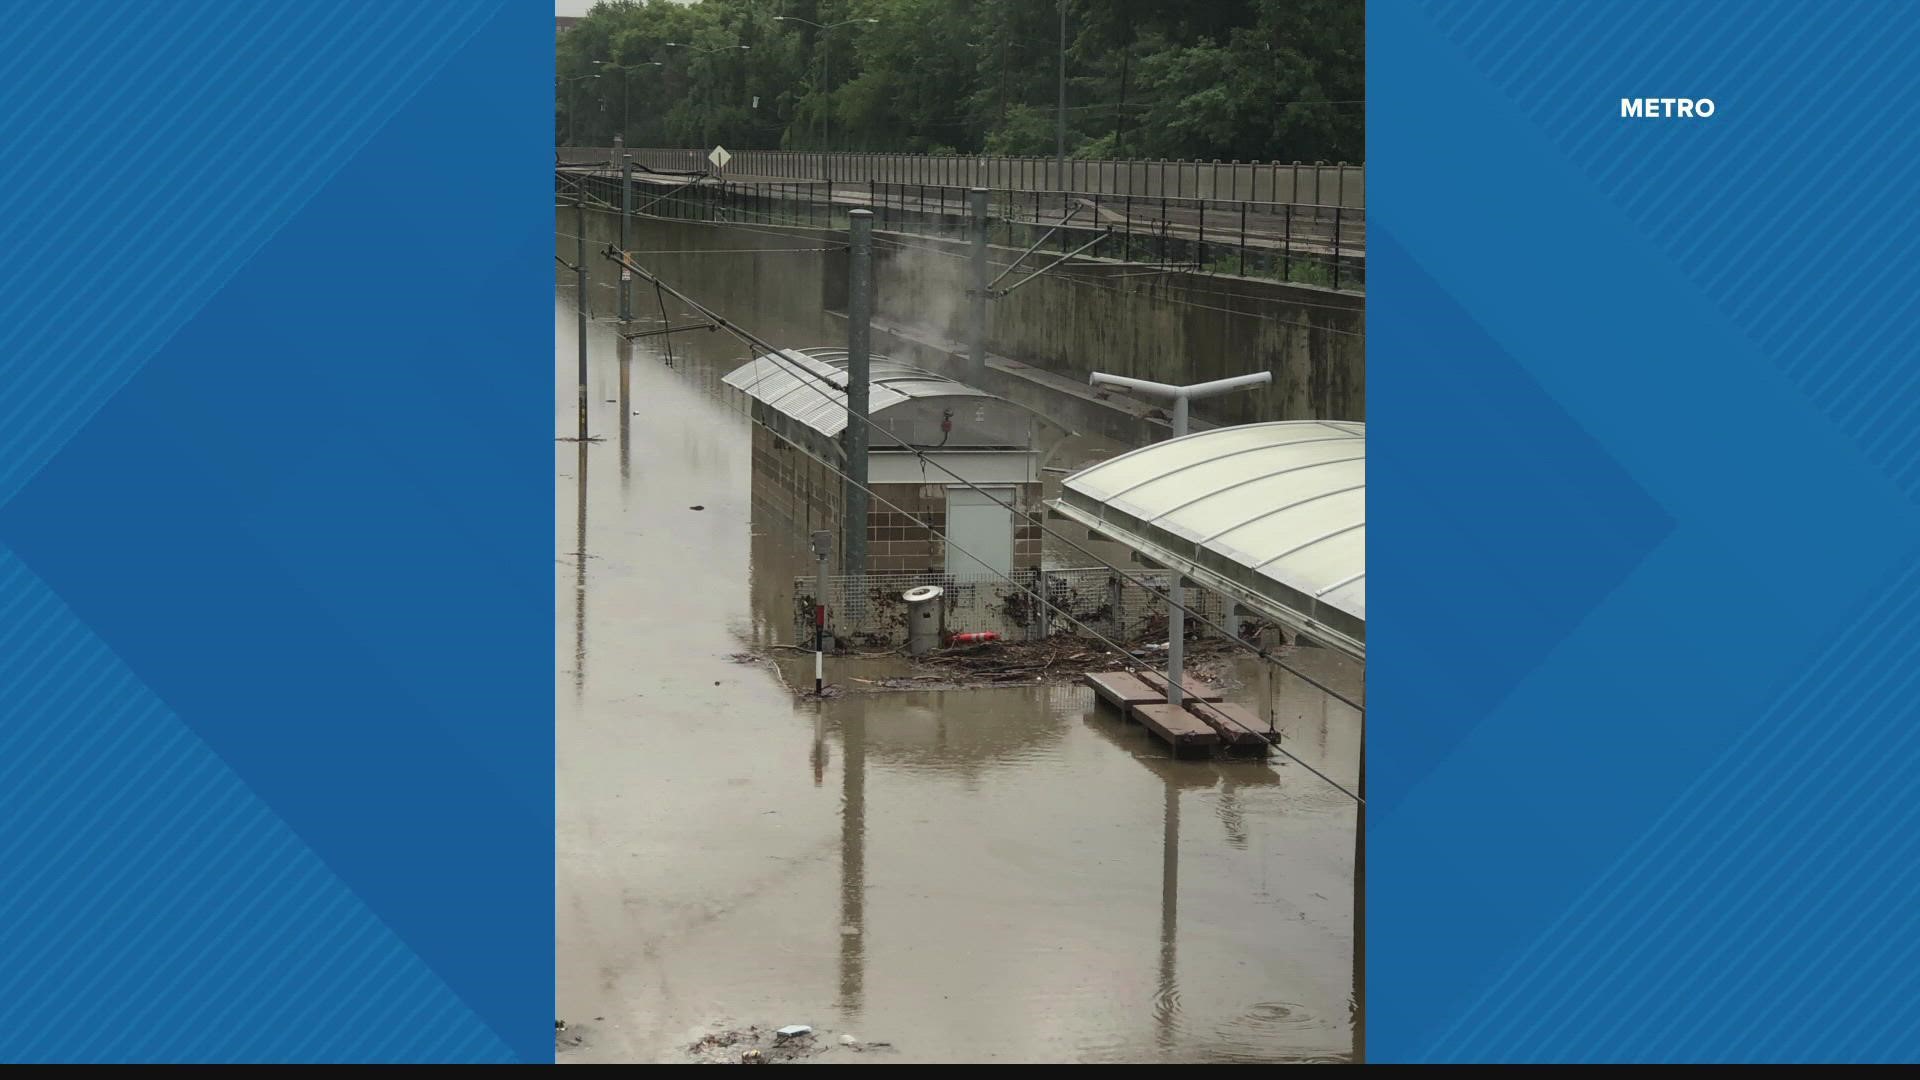 Metro Transit updates customers on delays due to historic rainfall and flooding in the area. Some MetroLink services may be down for weeks.